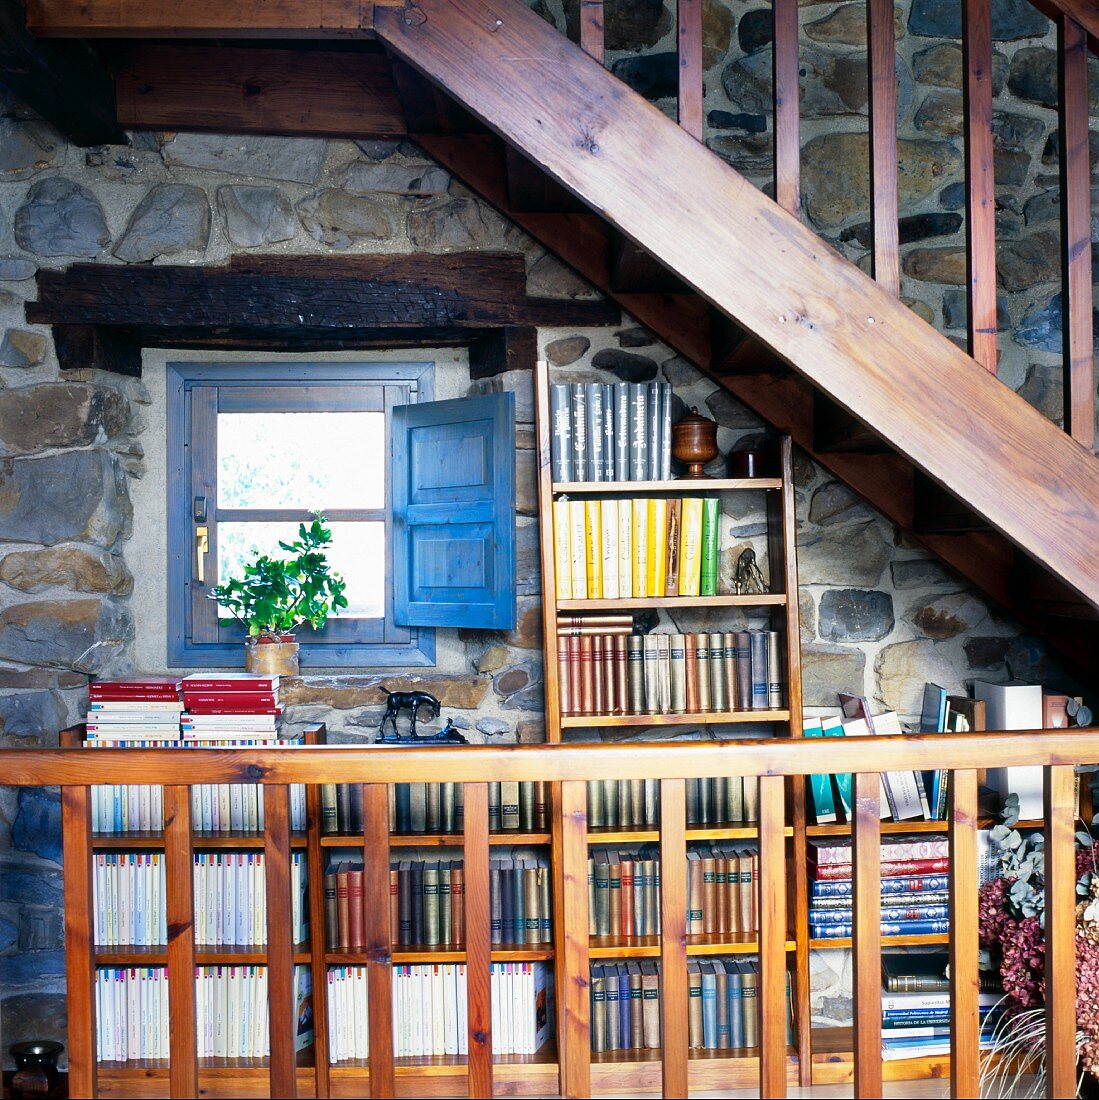 Wooden stairway above a mini-library on a natural stone wall of a country home